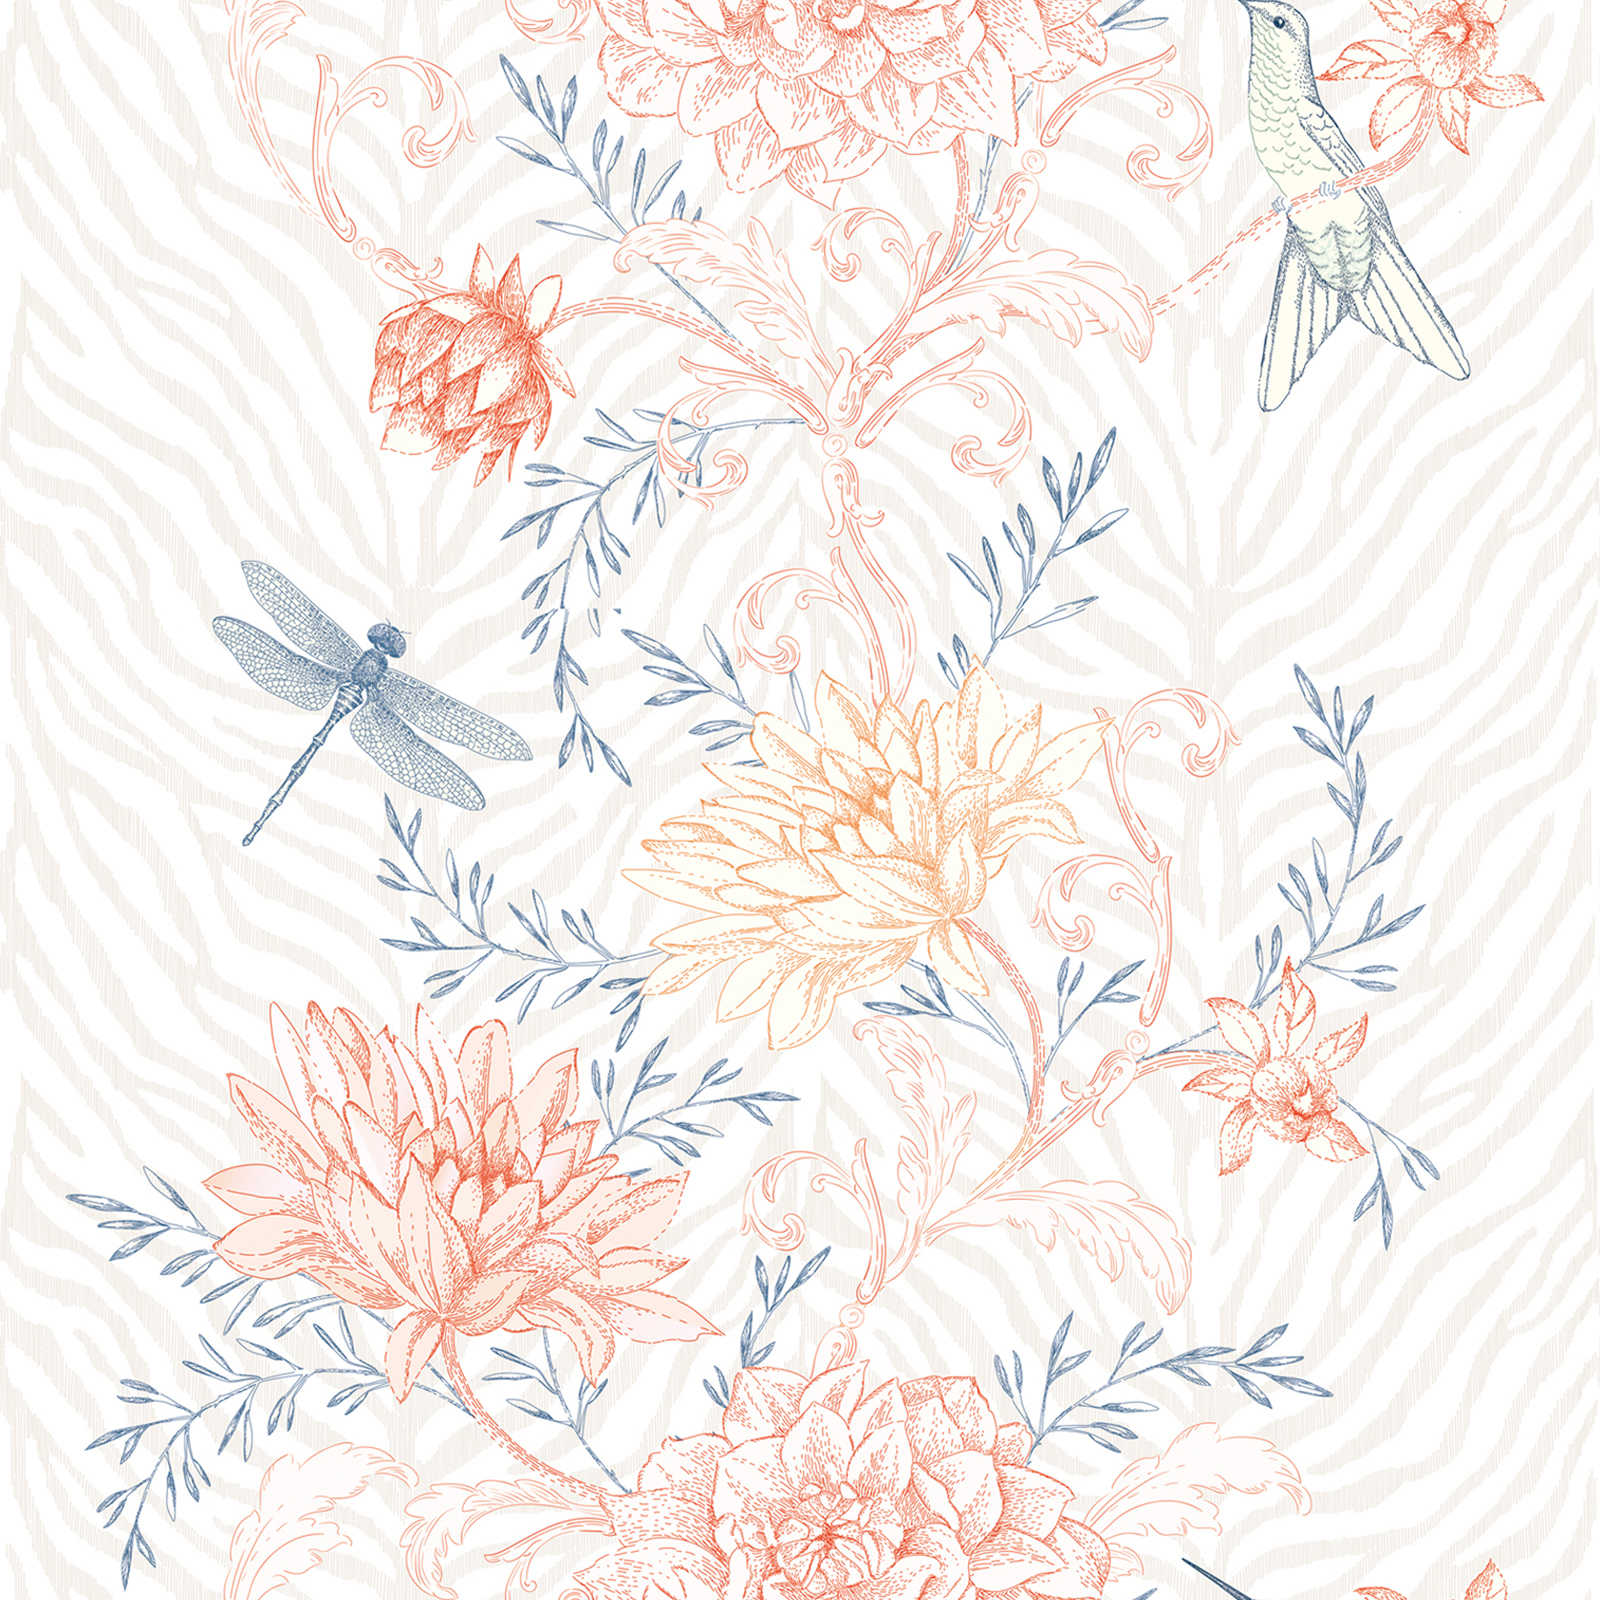 Bright flower tendrils wallpaper with birds and dragonflies - colourful, orange, blue
